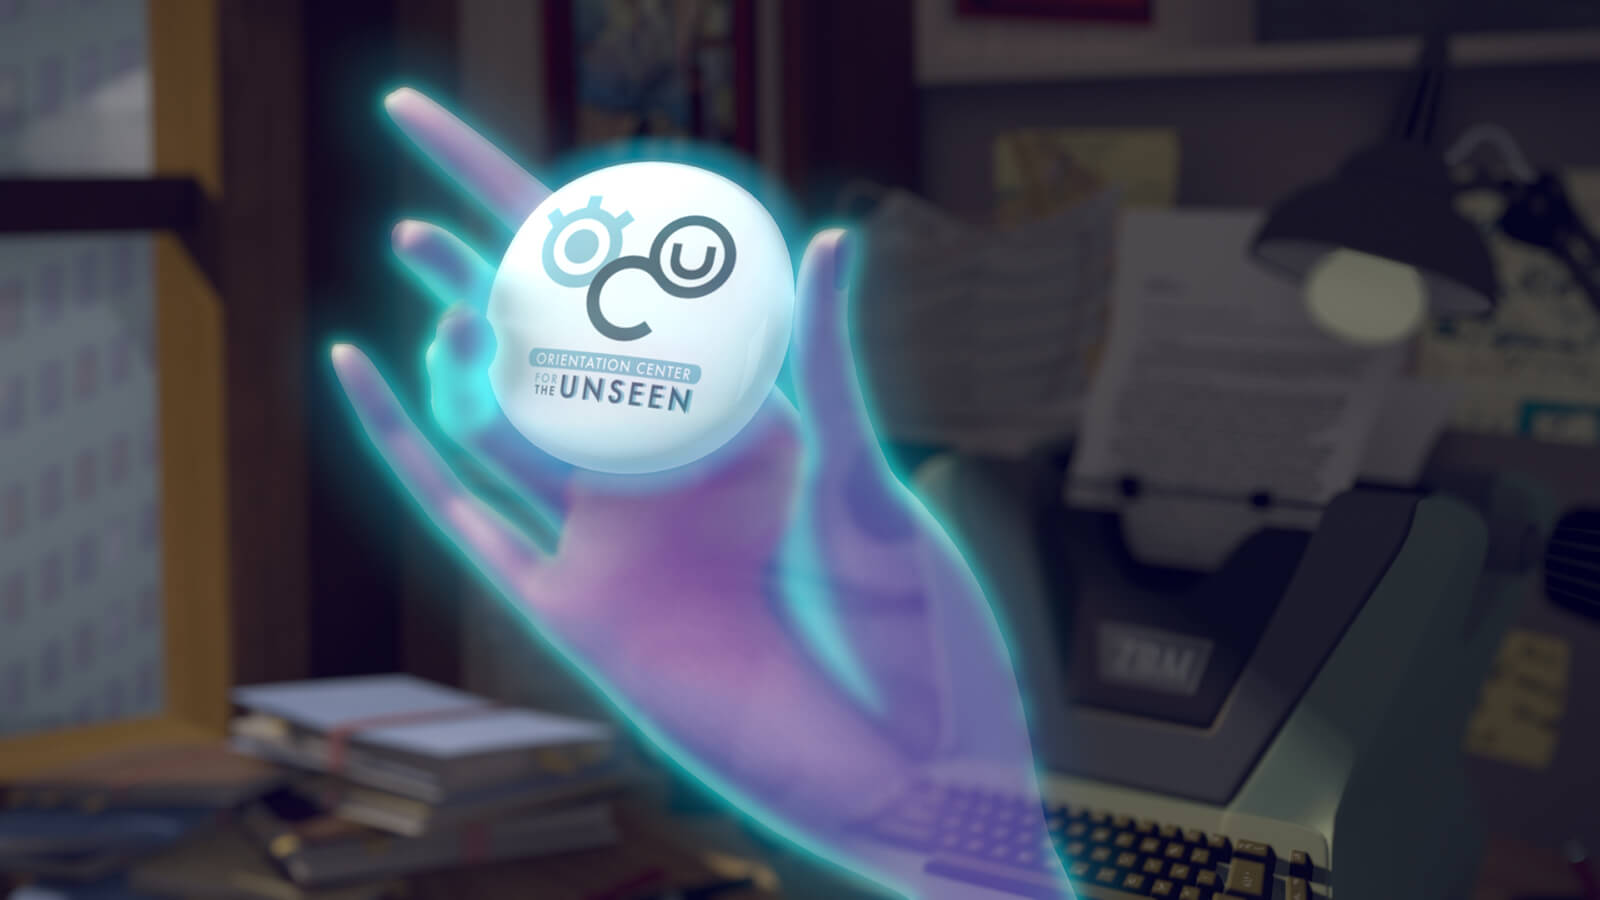 A translucent, glowing blue hand holds up a round, white button reading "Orientation Center for the Unseen."